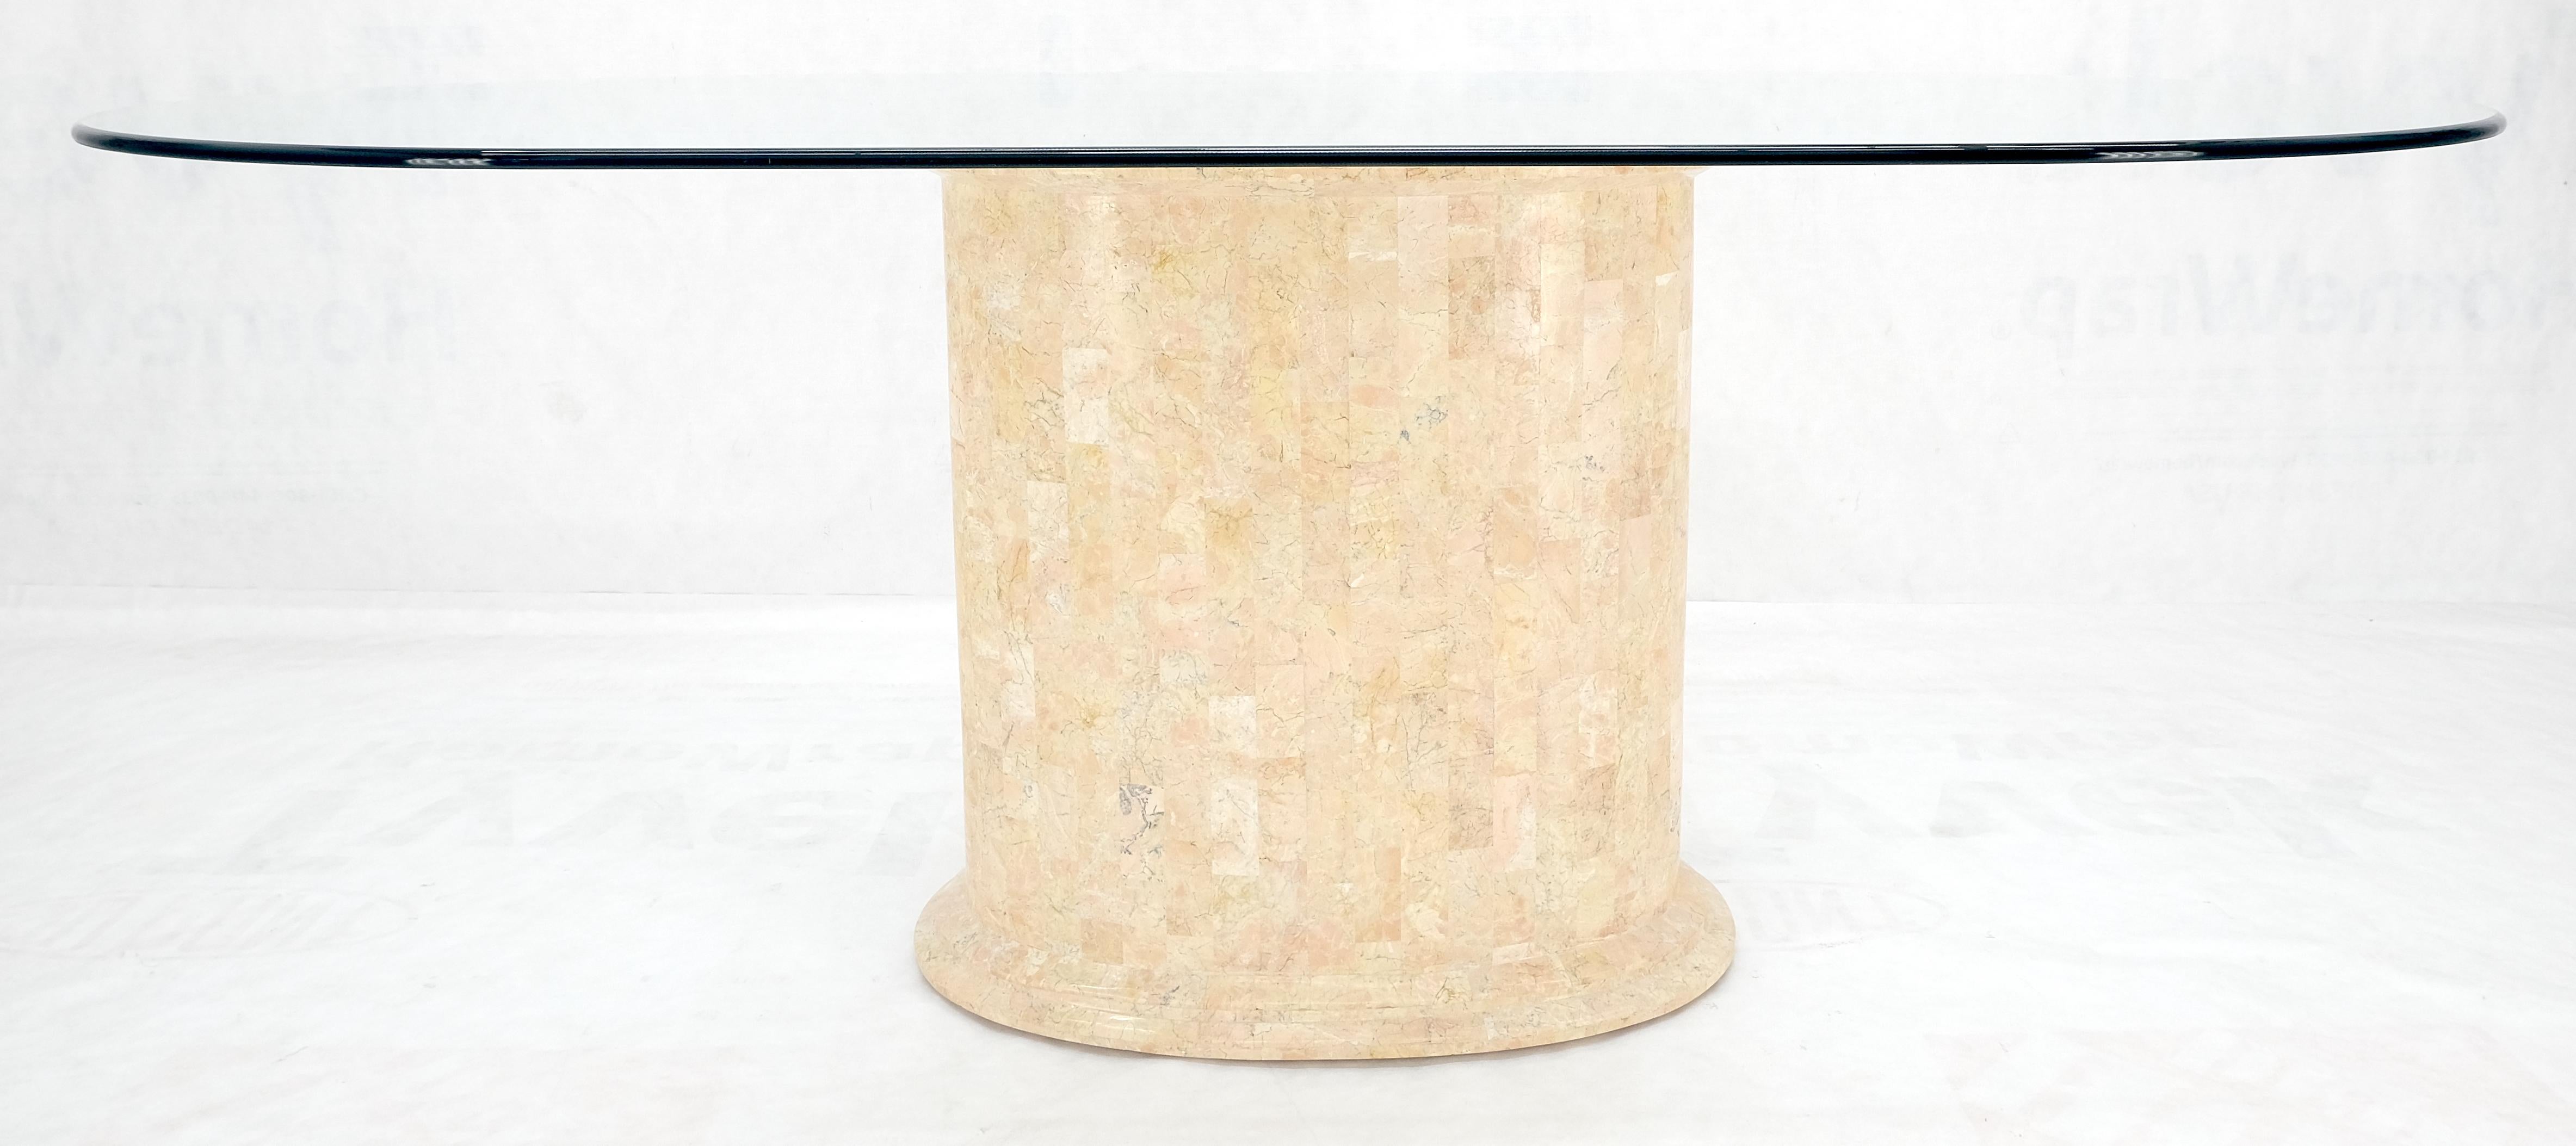 Racetrack Oval Glass Top Single Tessellated Marble Pedestal Base Dining Table  im Zustand „Gut“ im Angebot in Rockaway, NJ